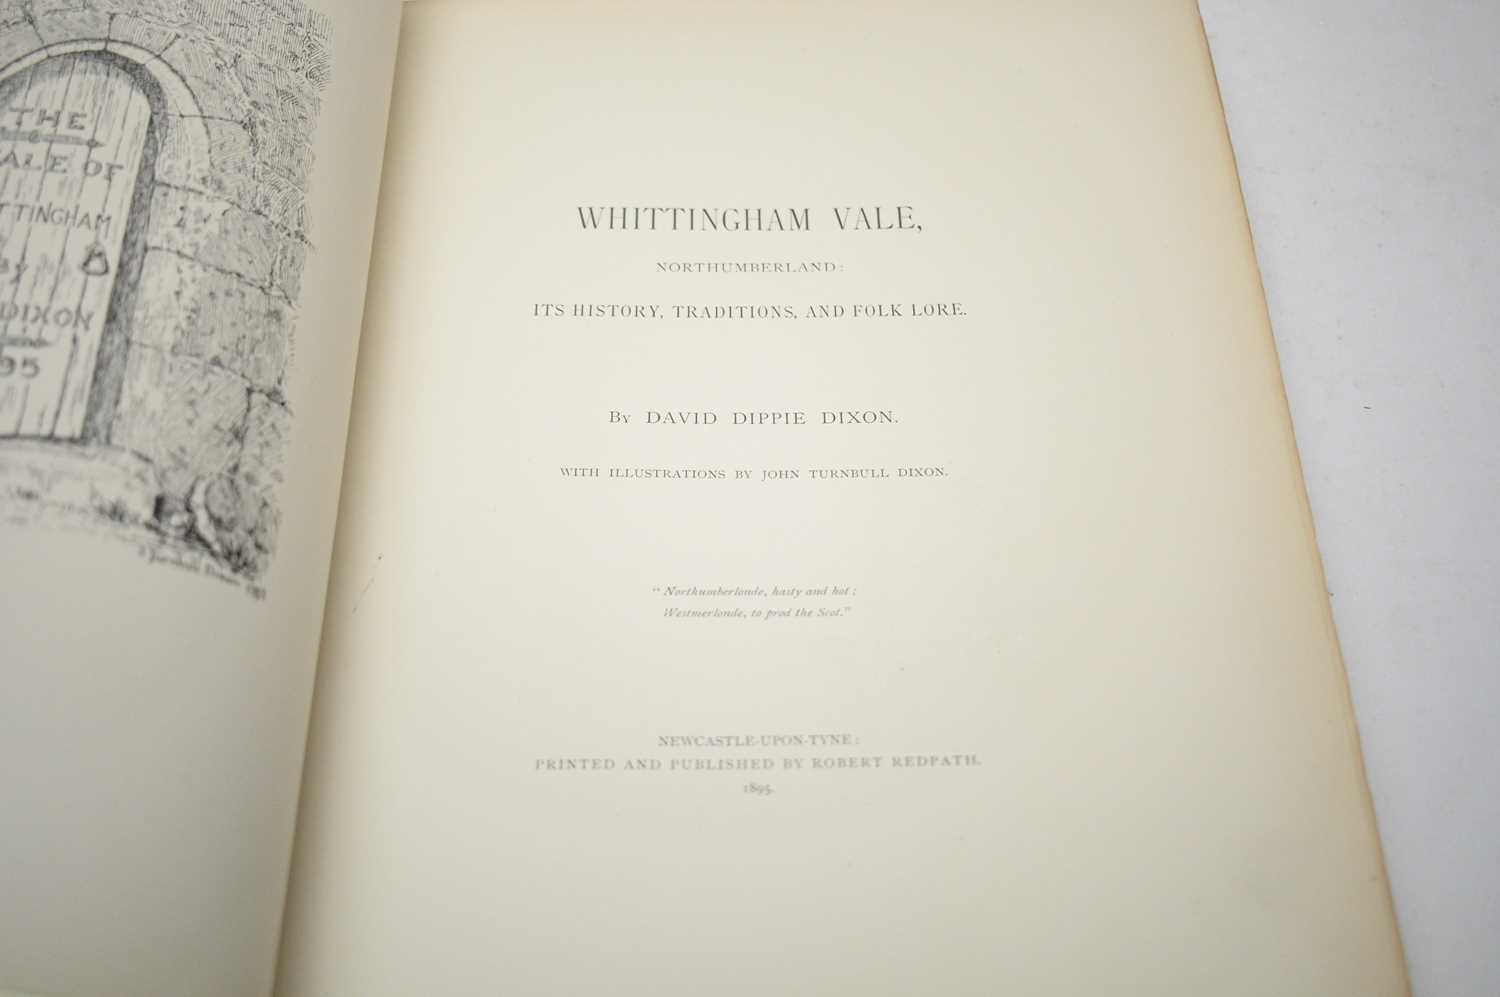 Whittingham Vale, by David Dippie Dixon. - Image 2 of 10